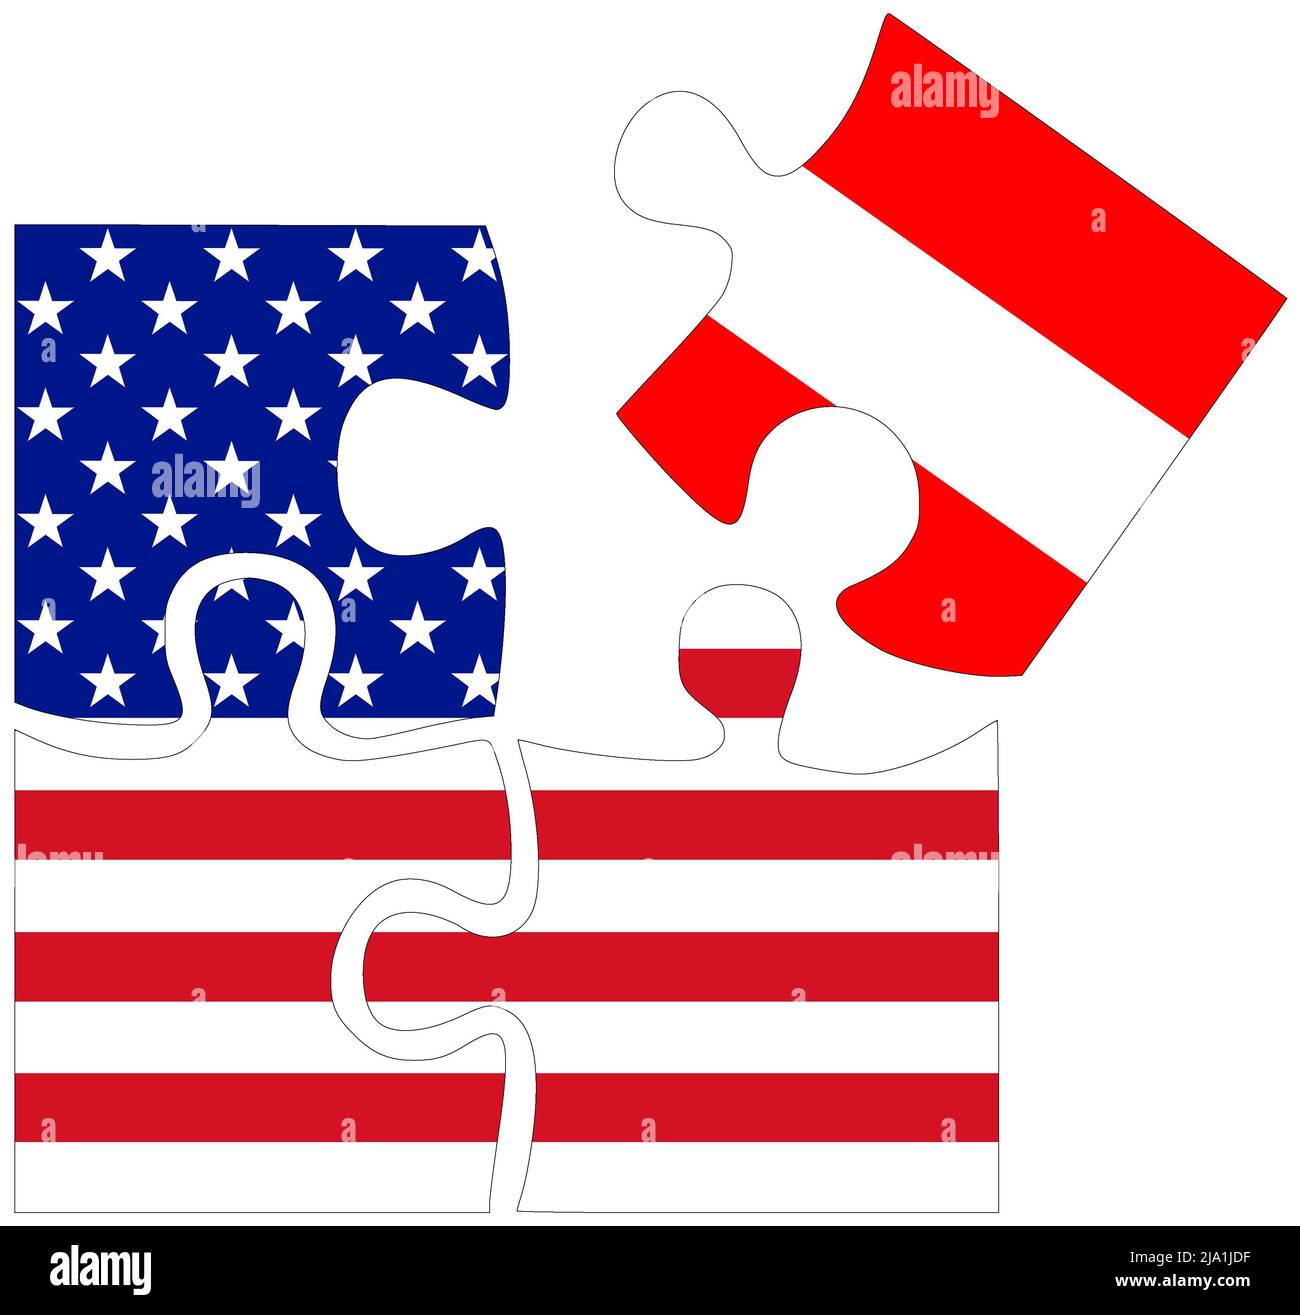 USA - Austria : puzzle shapes with flags, symbol of agreement or friendship Stock Photo